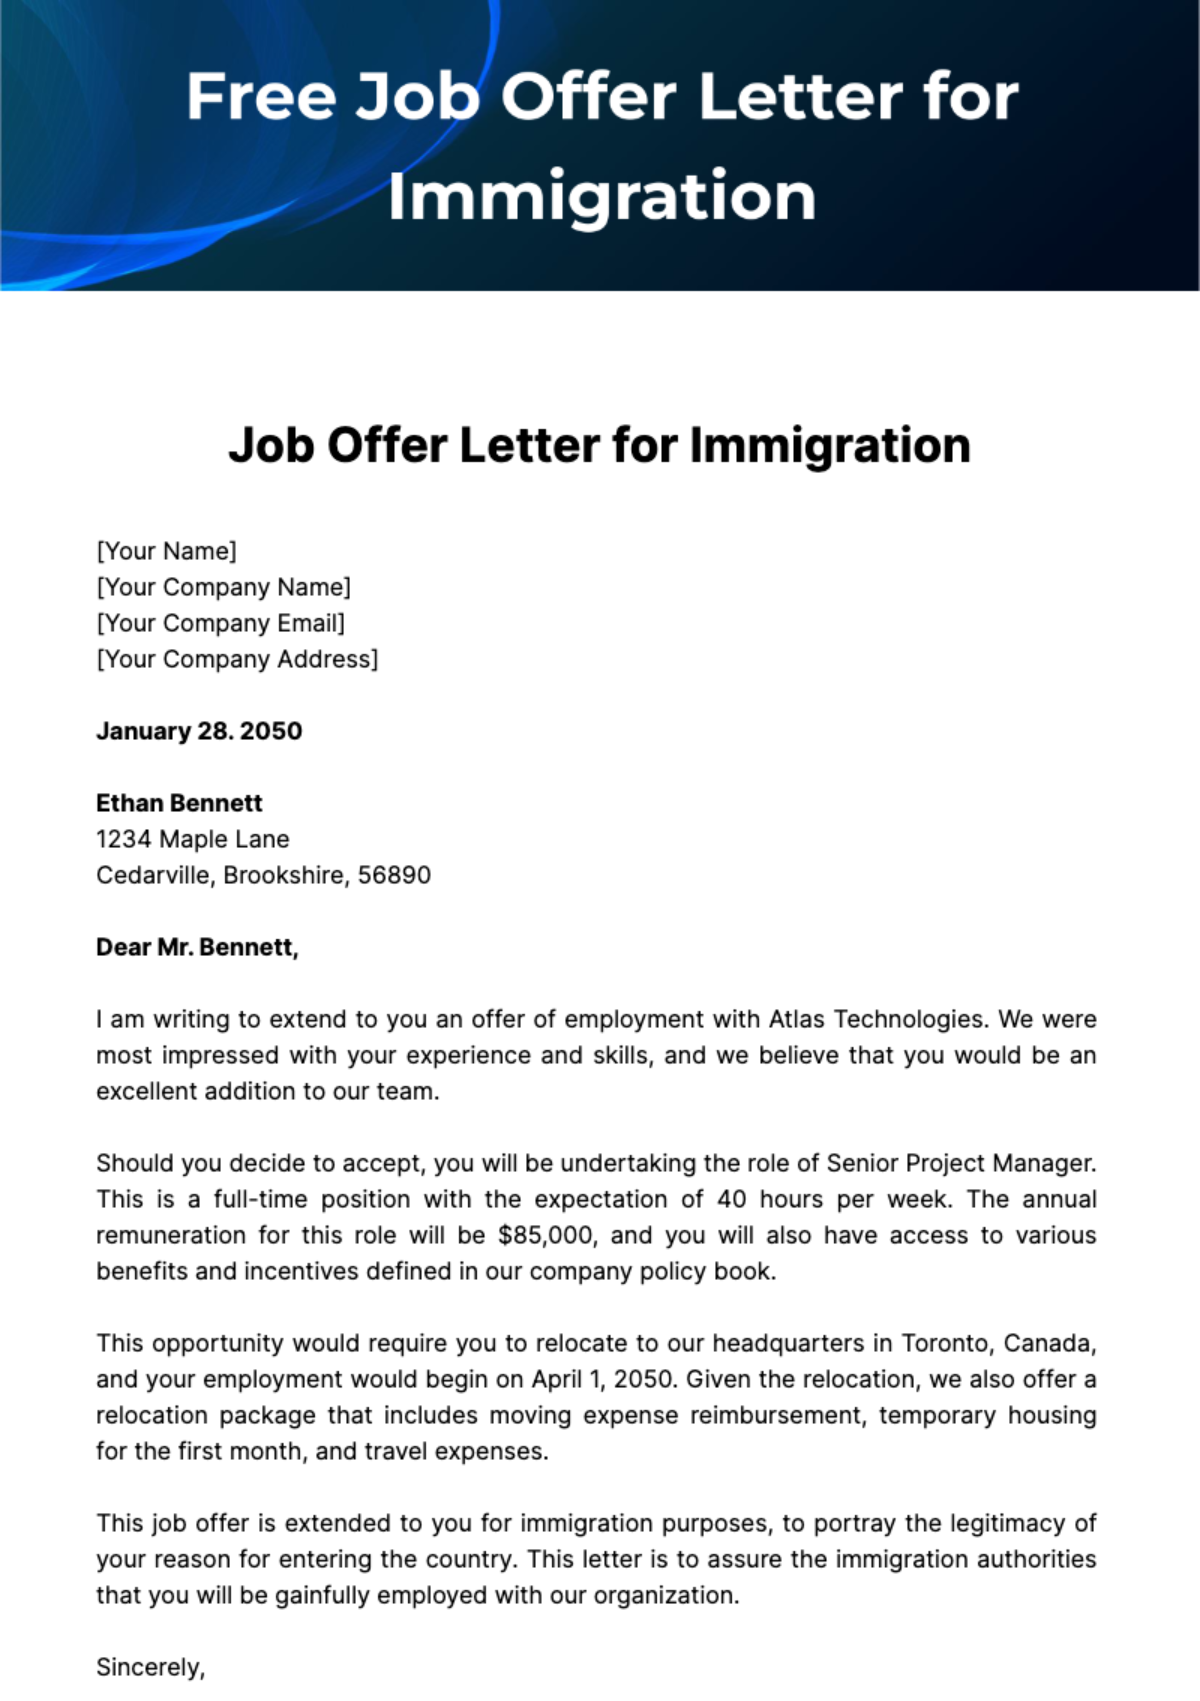 Free Job Offer Letter for Immigration Template